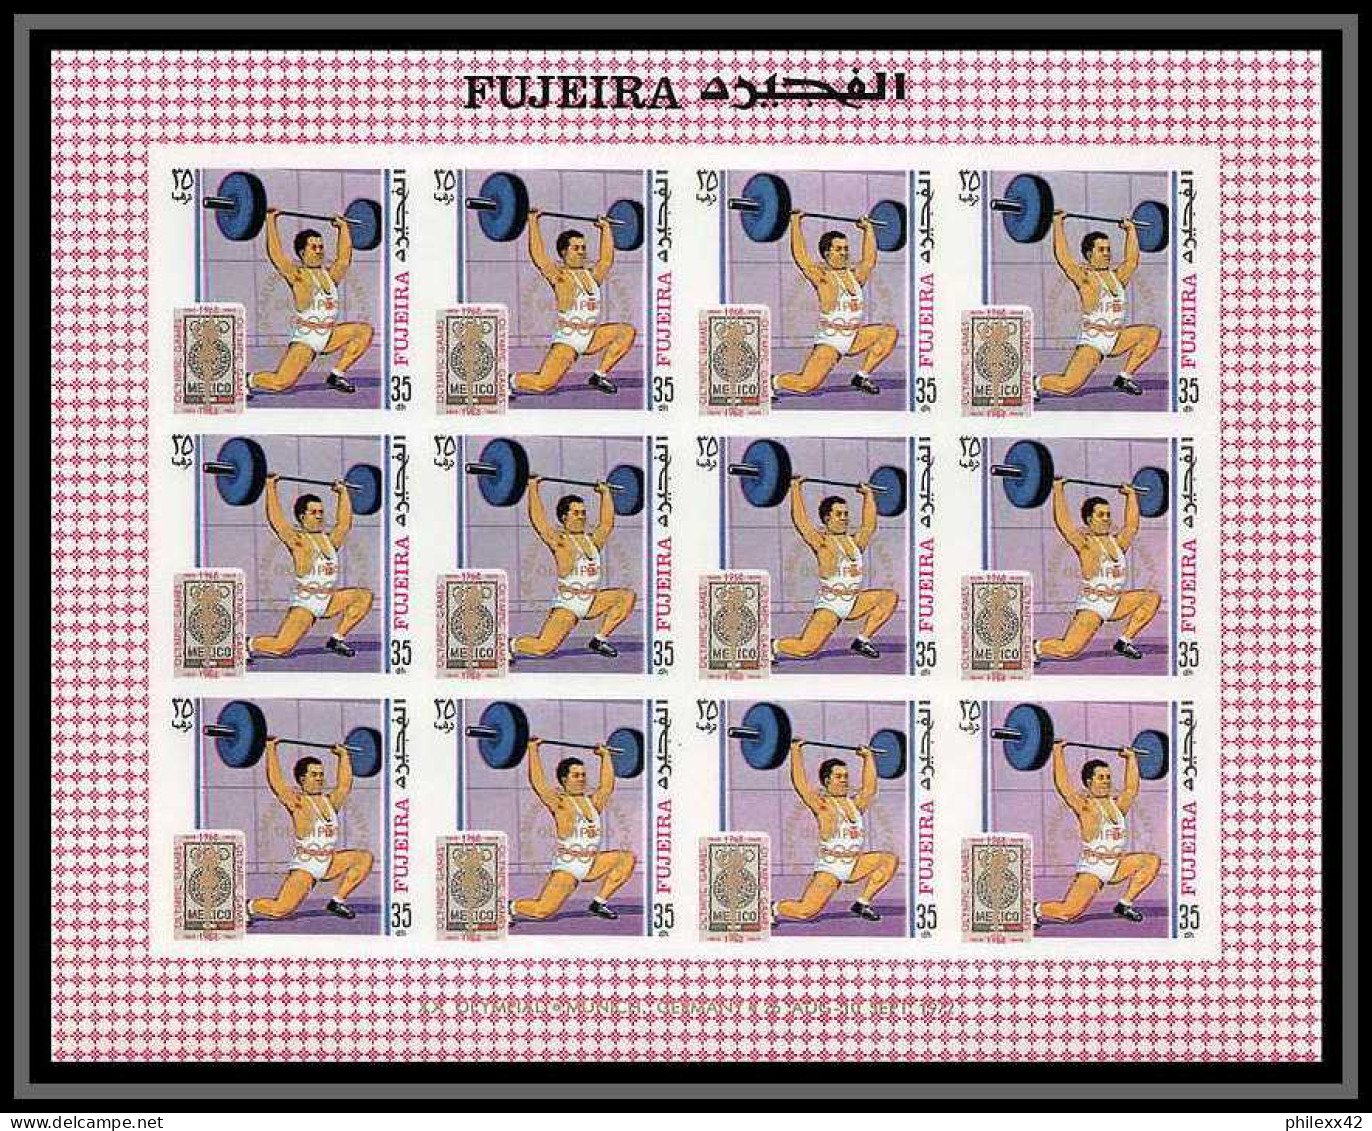 181a Fujeira MNH ** N° 320 / 329 B overprint non dentelé (Imperf) jeux olympiques olympic games mexico feuilles (sheets)